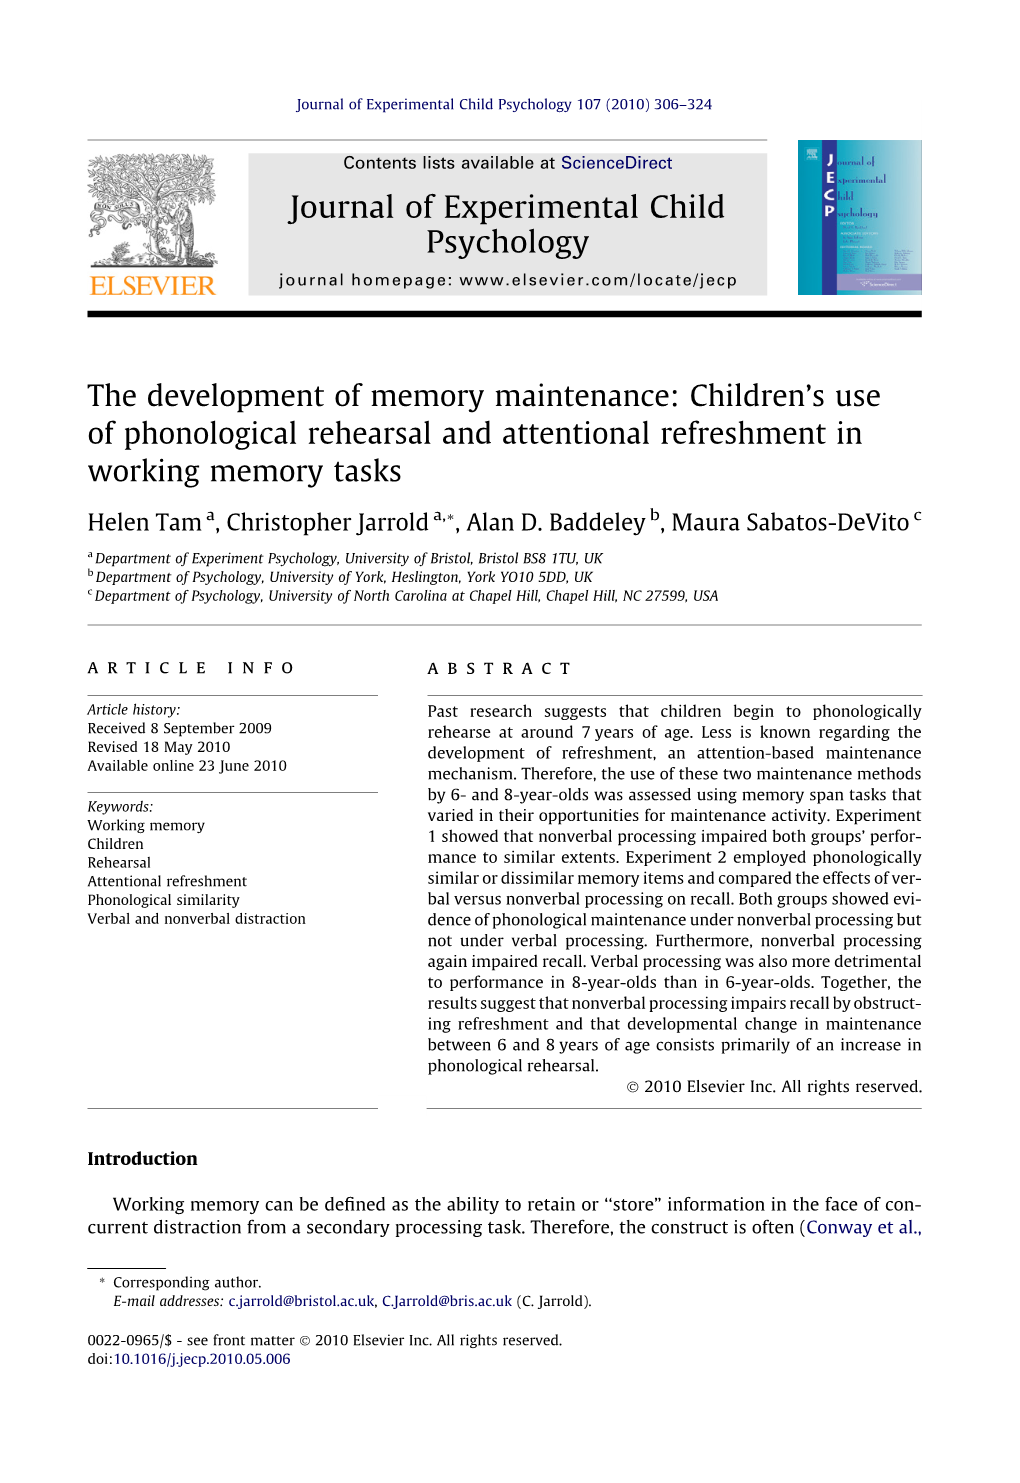 The Development of Memory Maintenance: Children’S Use of Phonological Rehearsal and Attentional Refreshment in Working Memory Tasks